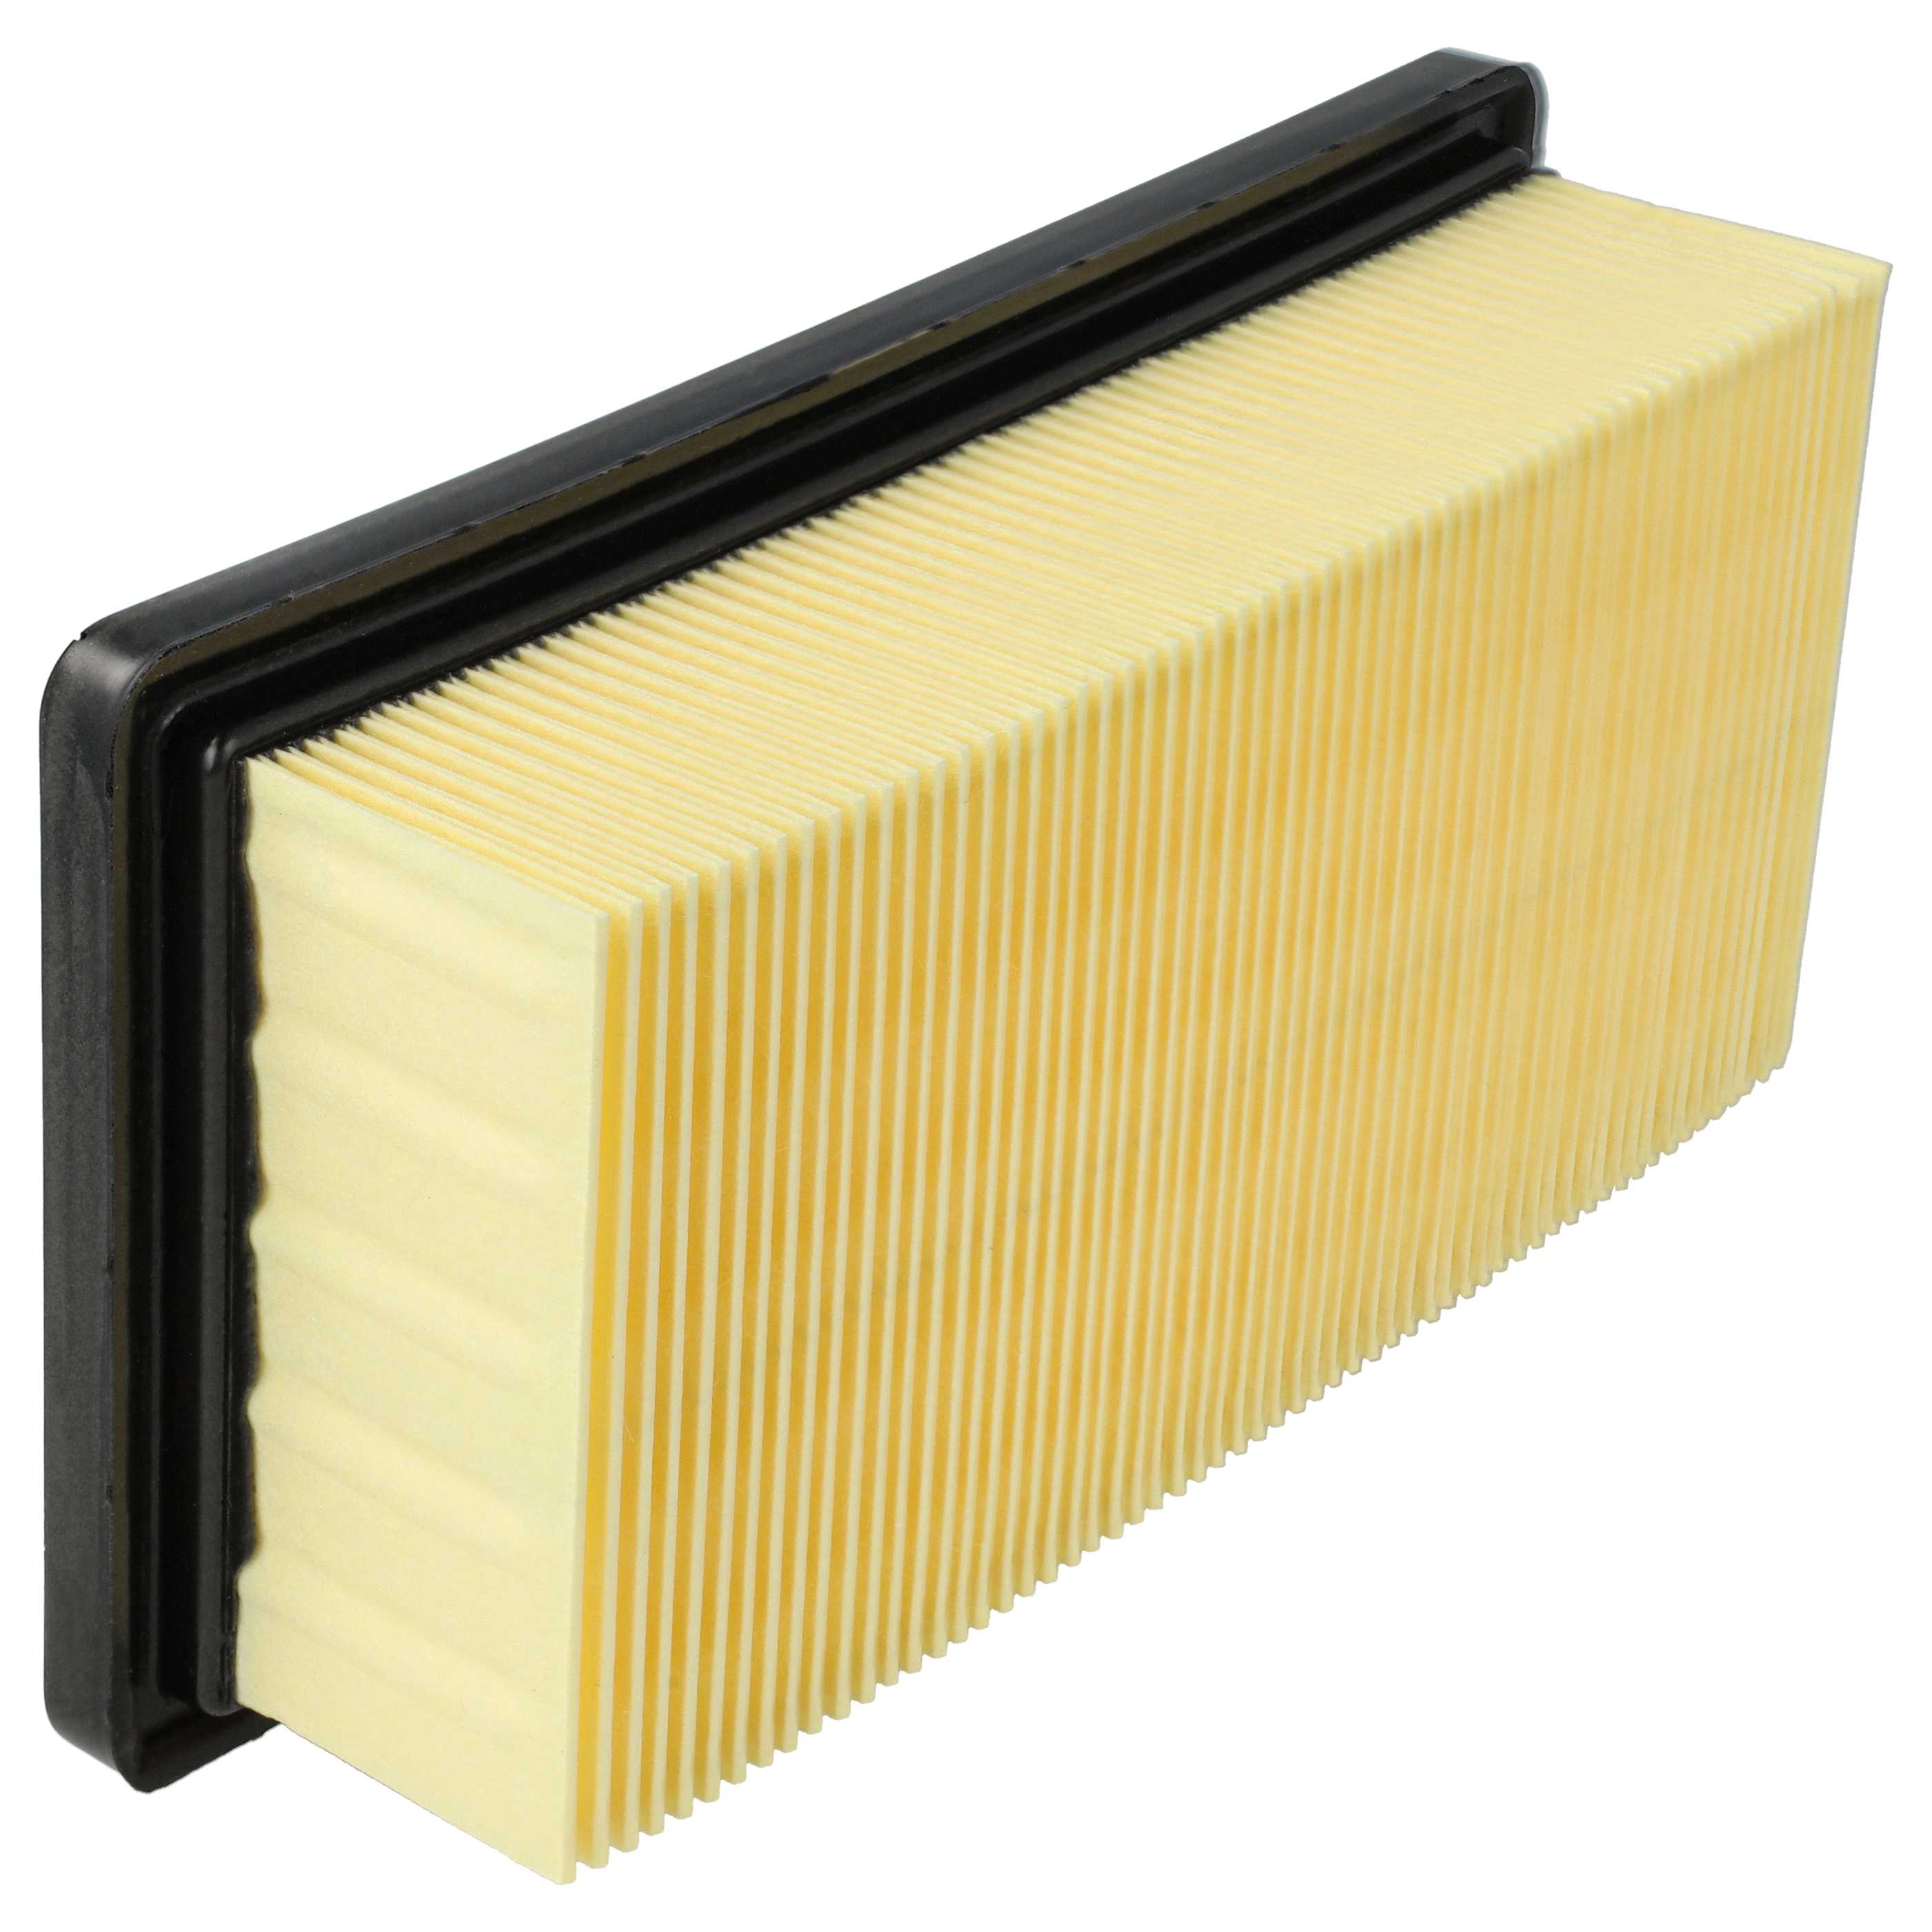 1x flat pleated filter replaces Kärcher 6.414-971.0 for Kärcher Vacuum Cleaner